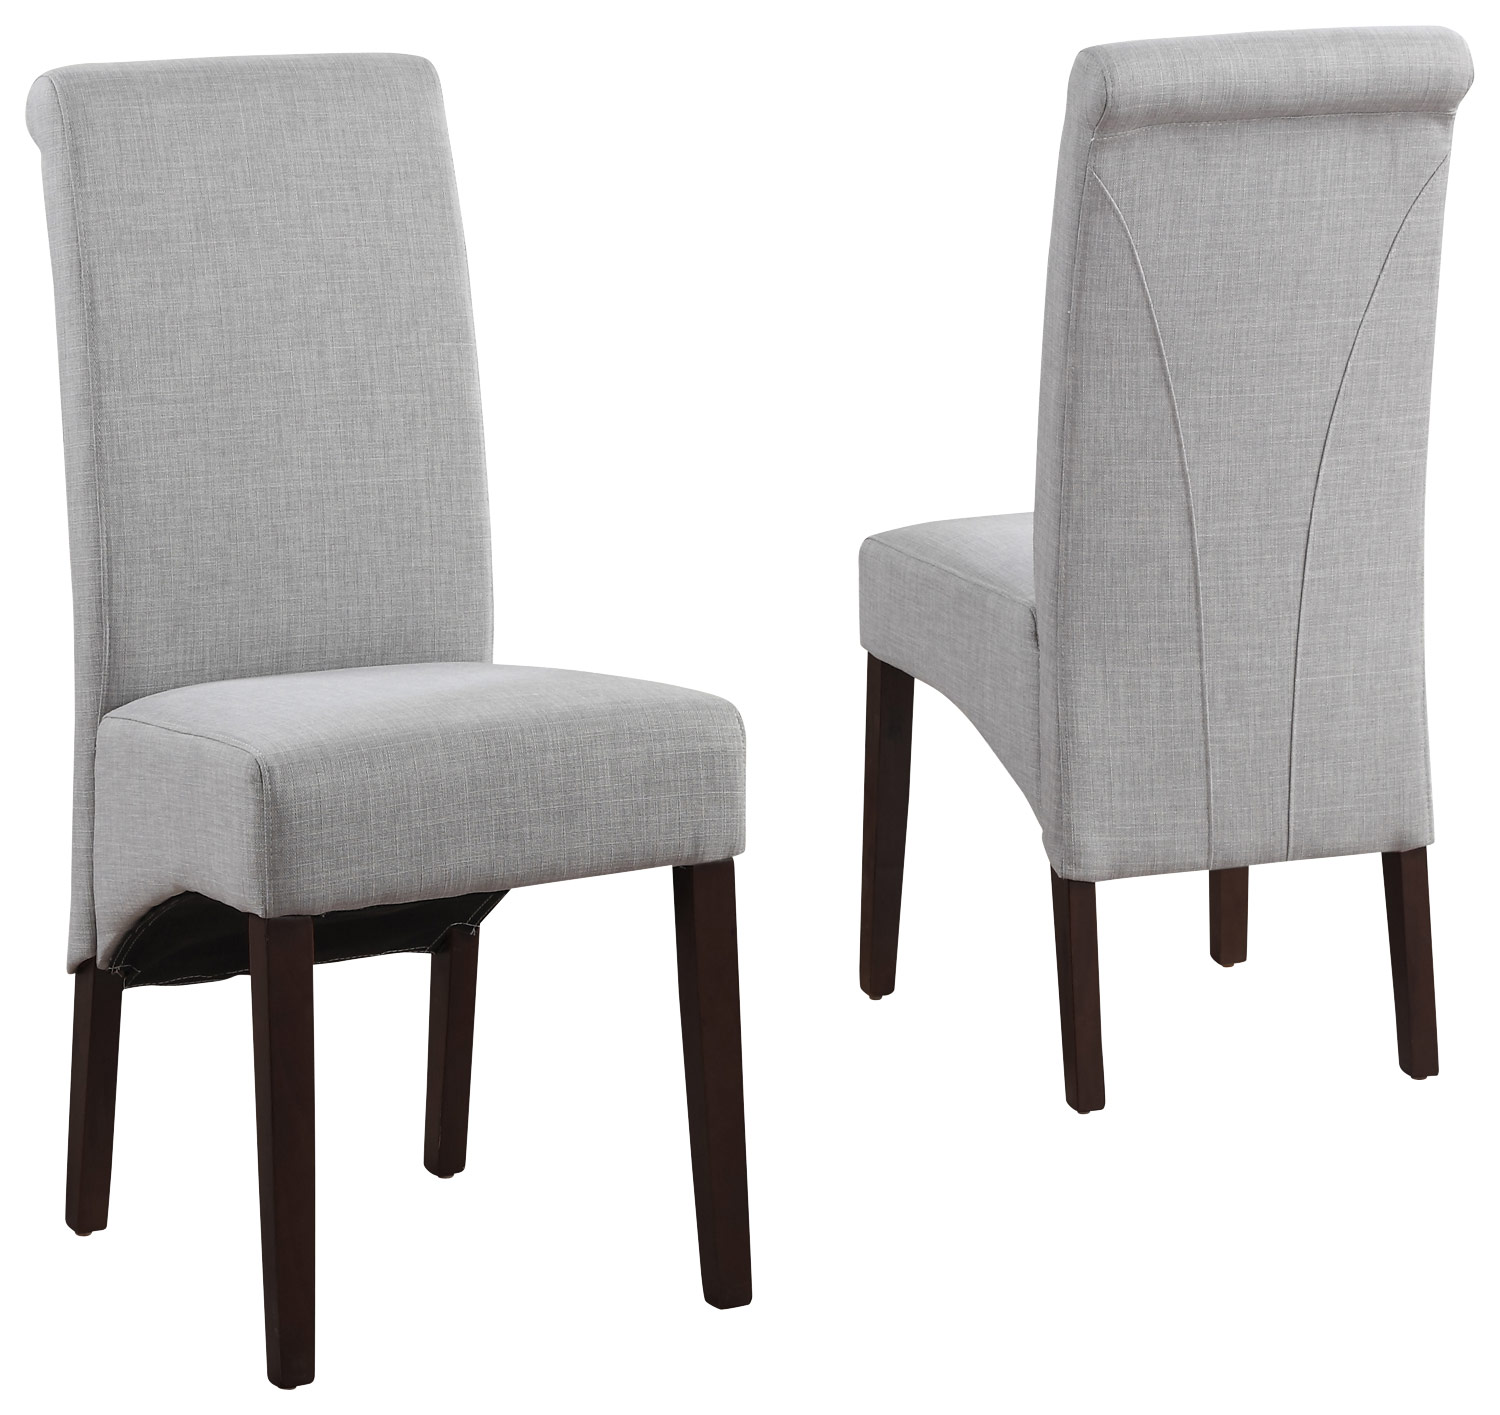 Simpli Home - Avalon Polyester & Wood Dining Chairs (Set of 2) - Dove Gray was $249.99 now $178.99 (28.0% off)